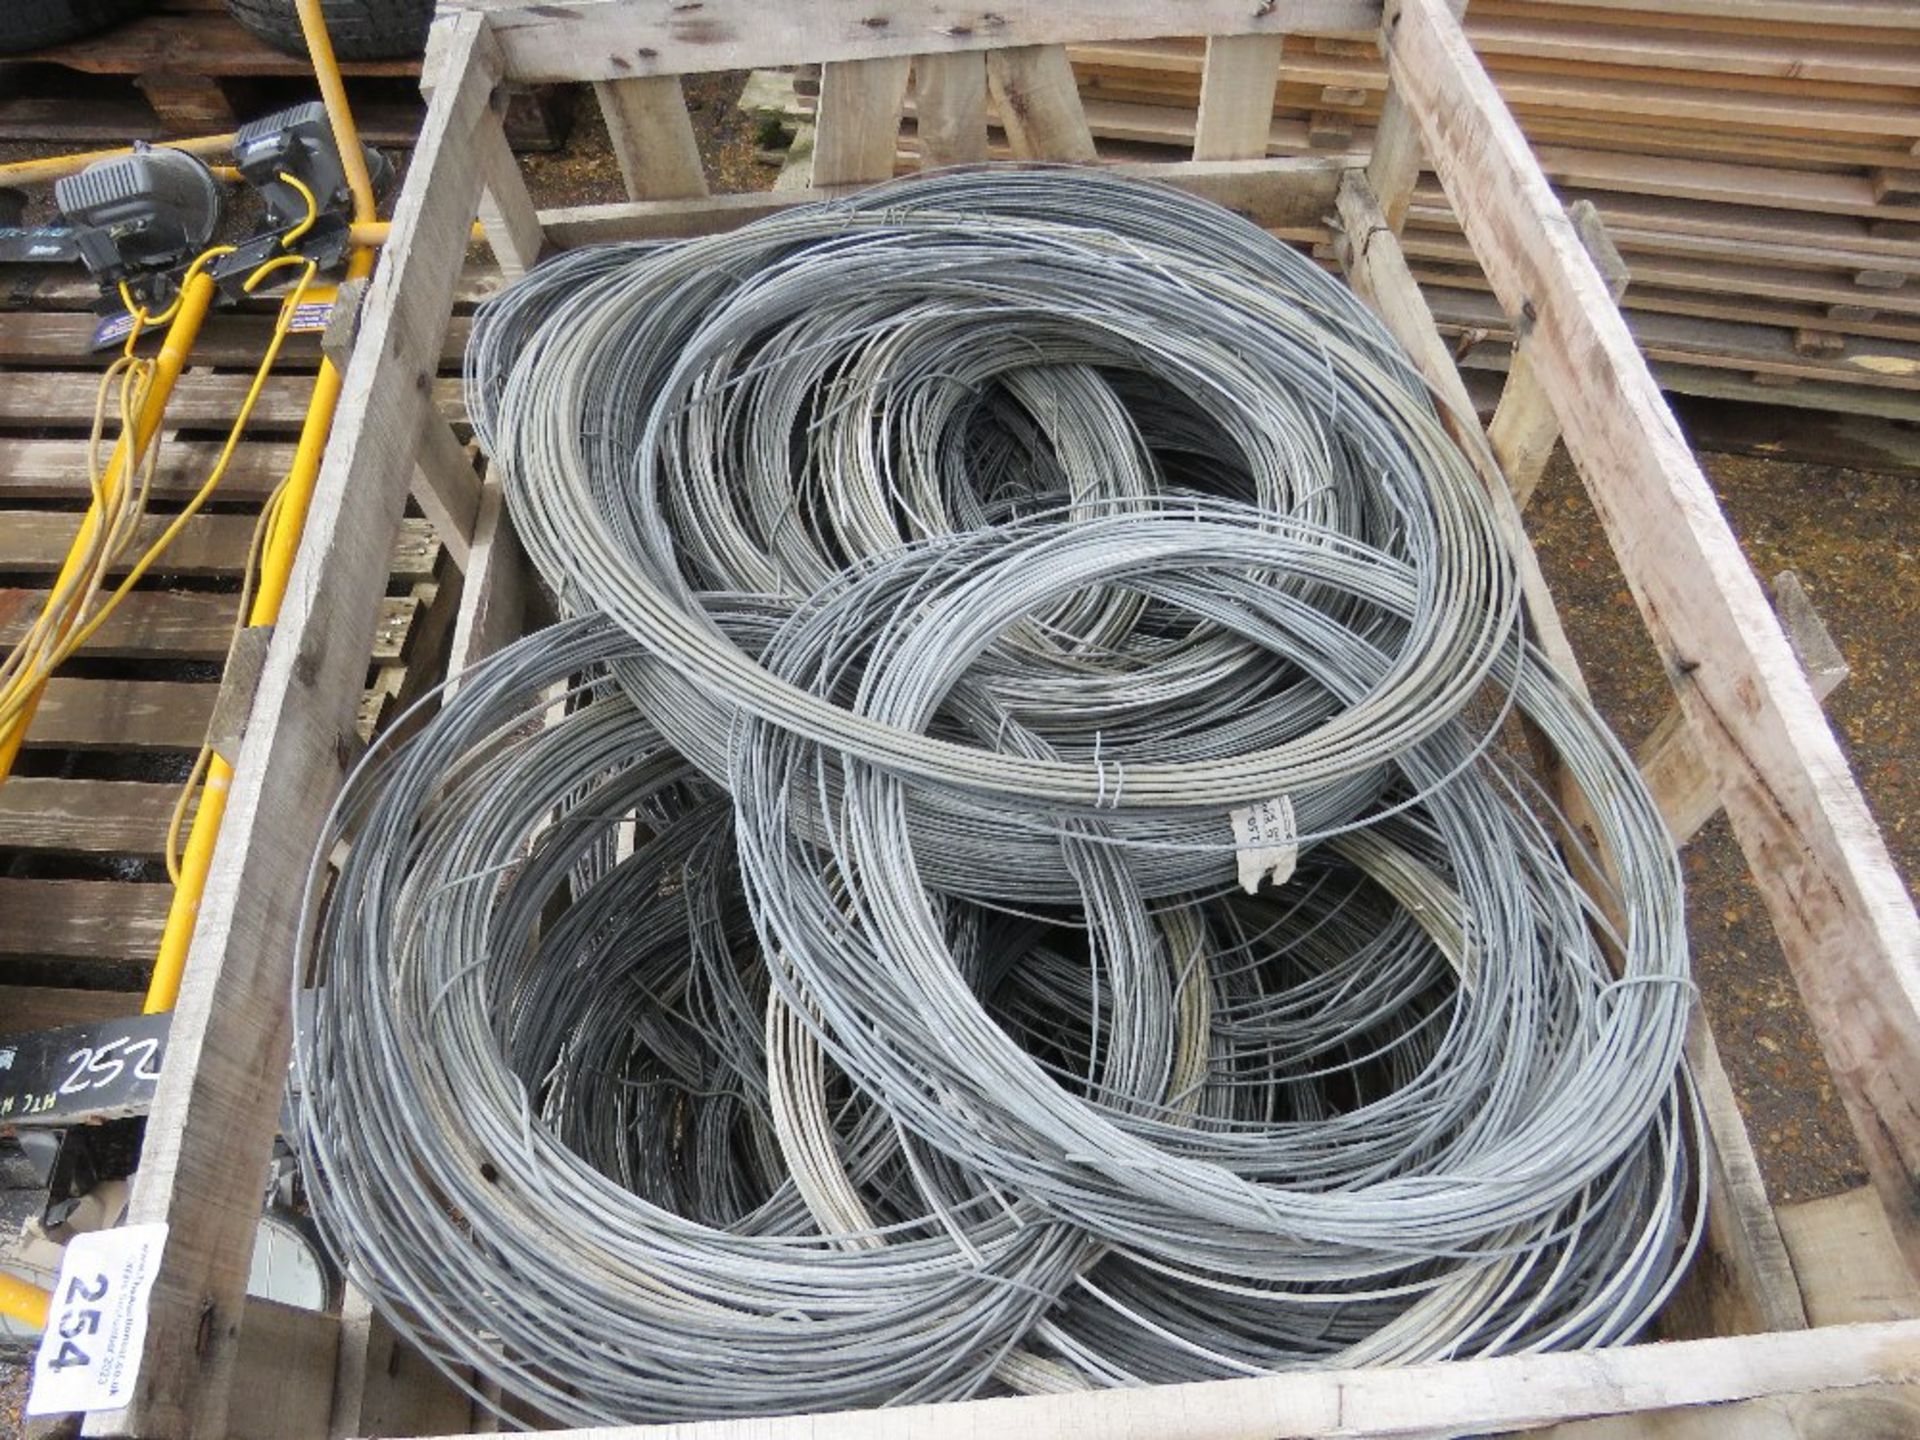 ASSORTED GALVANISED FENCING WIRE 2.5/3.5MM. - Image 2 of 6